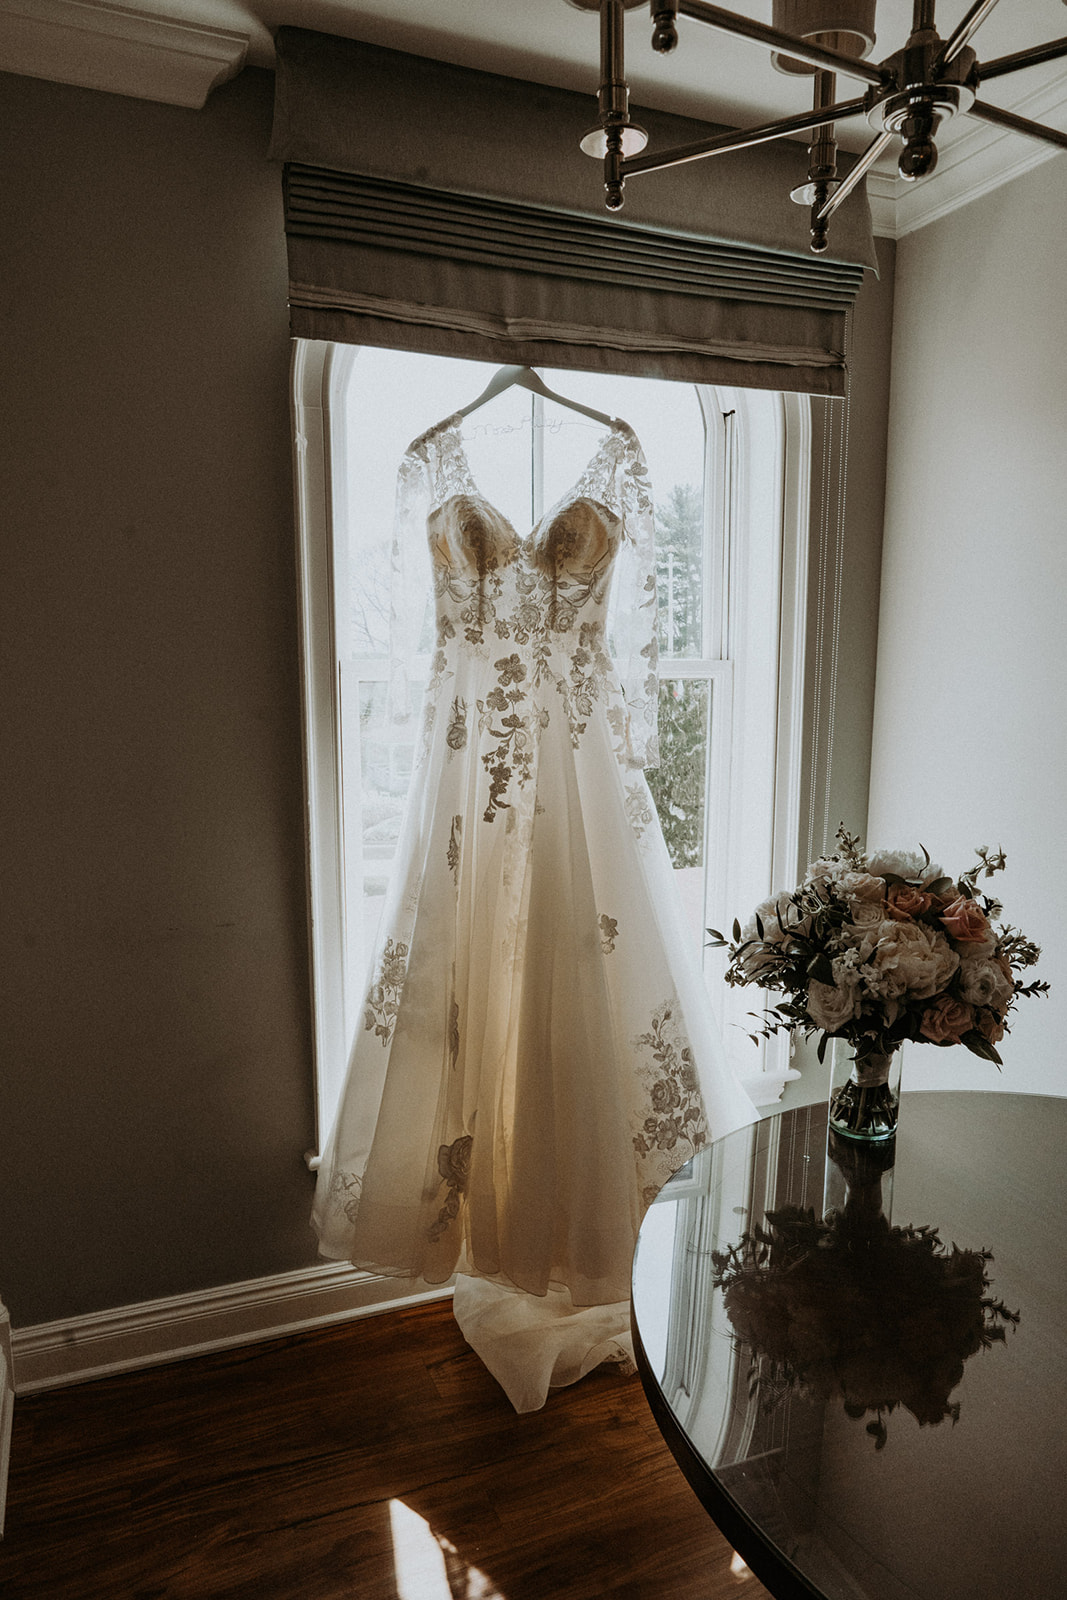 Lacy weddng dress hung in window